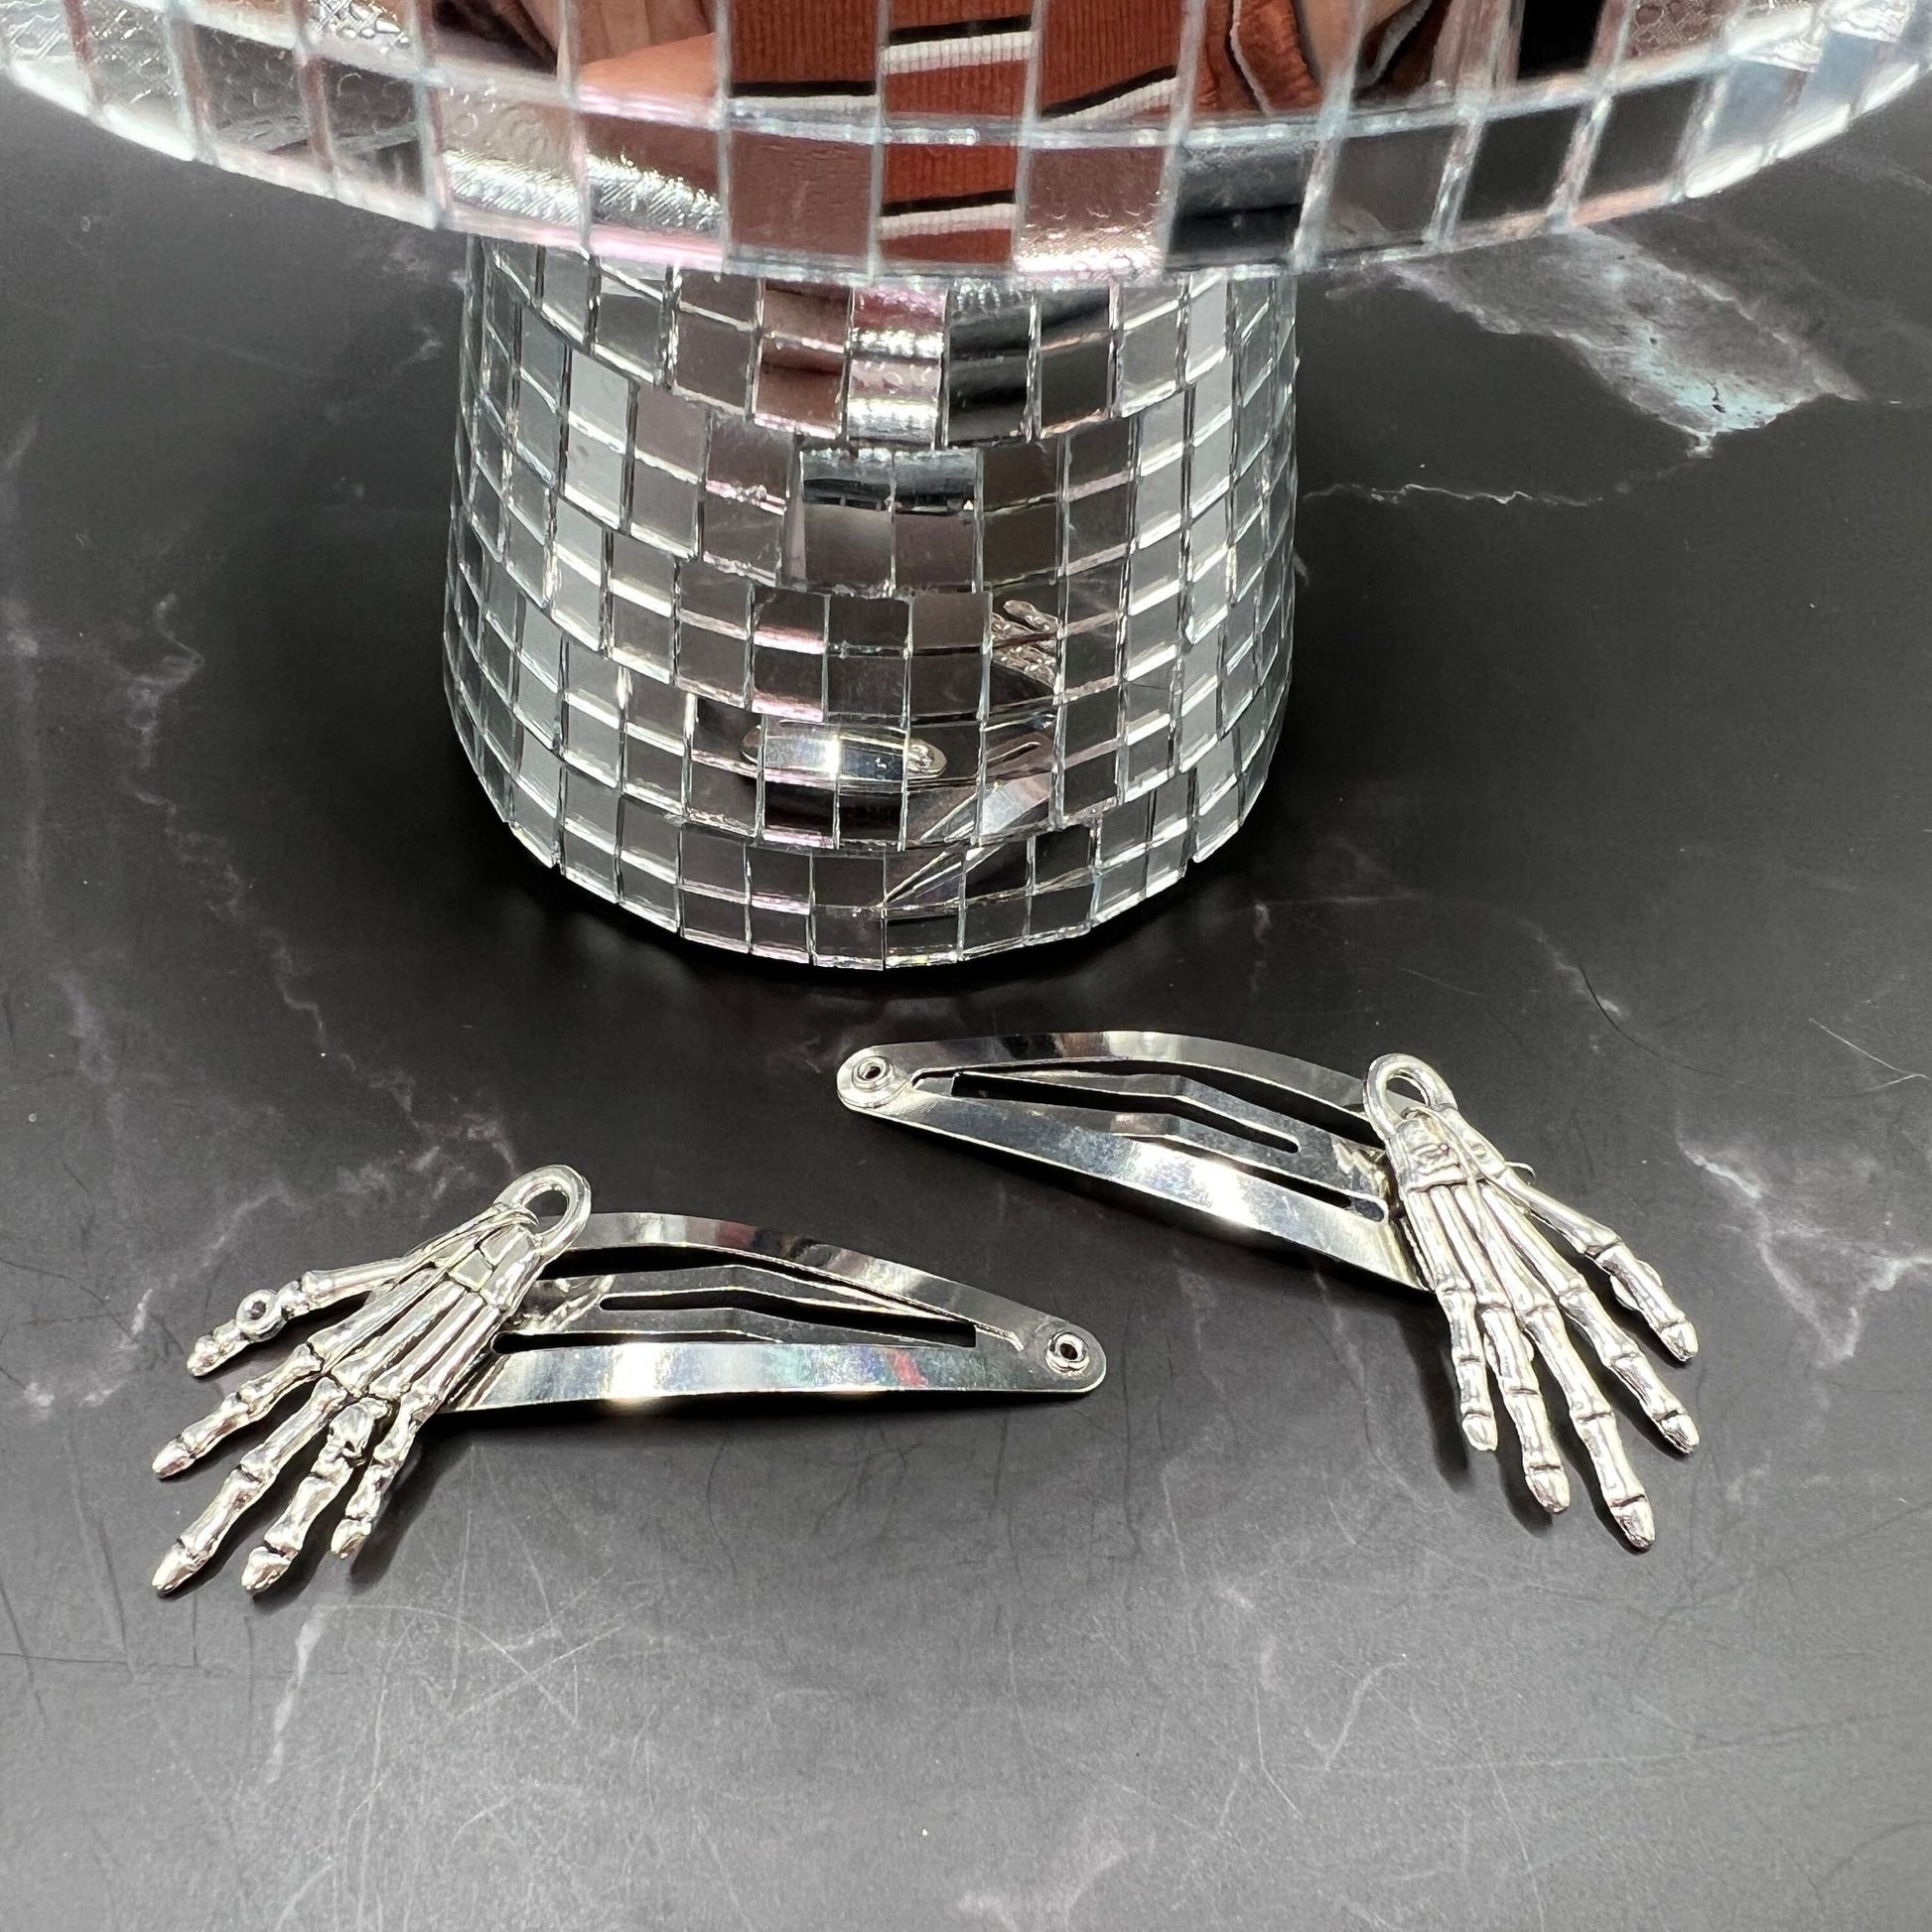 Set of 2 Halloween-themed hair clips with silver metal skeleton hands. Punk rock and gothic girly aesthetics for a bold, cute style. Displayed on a table. Front view.